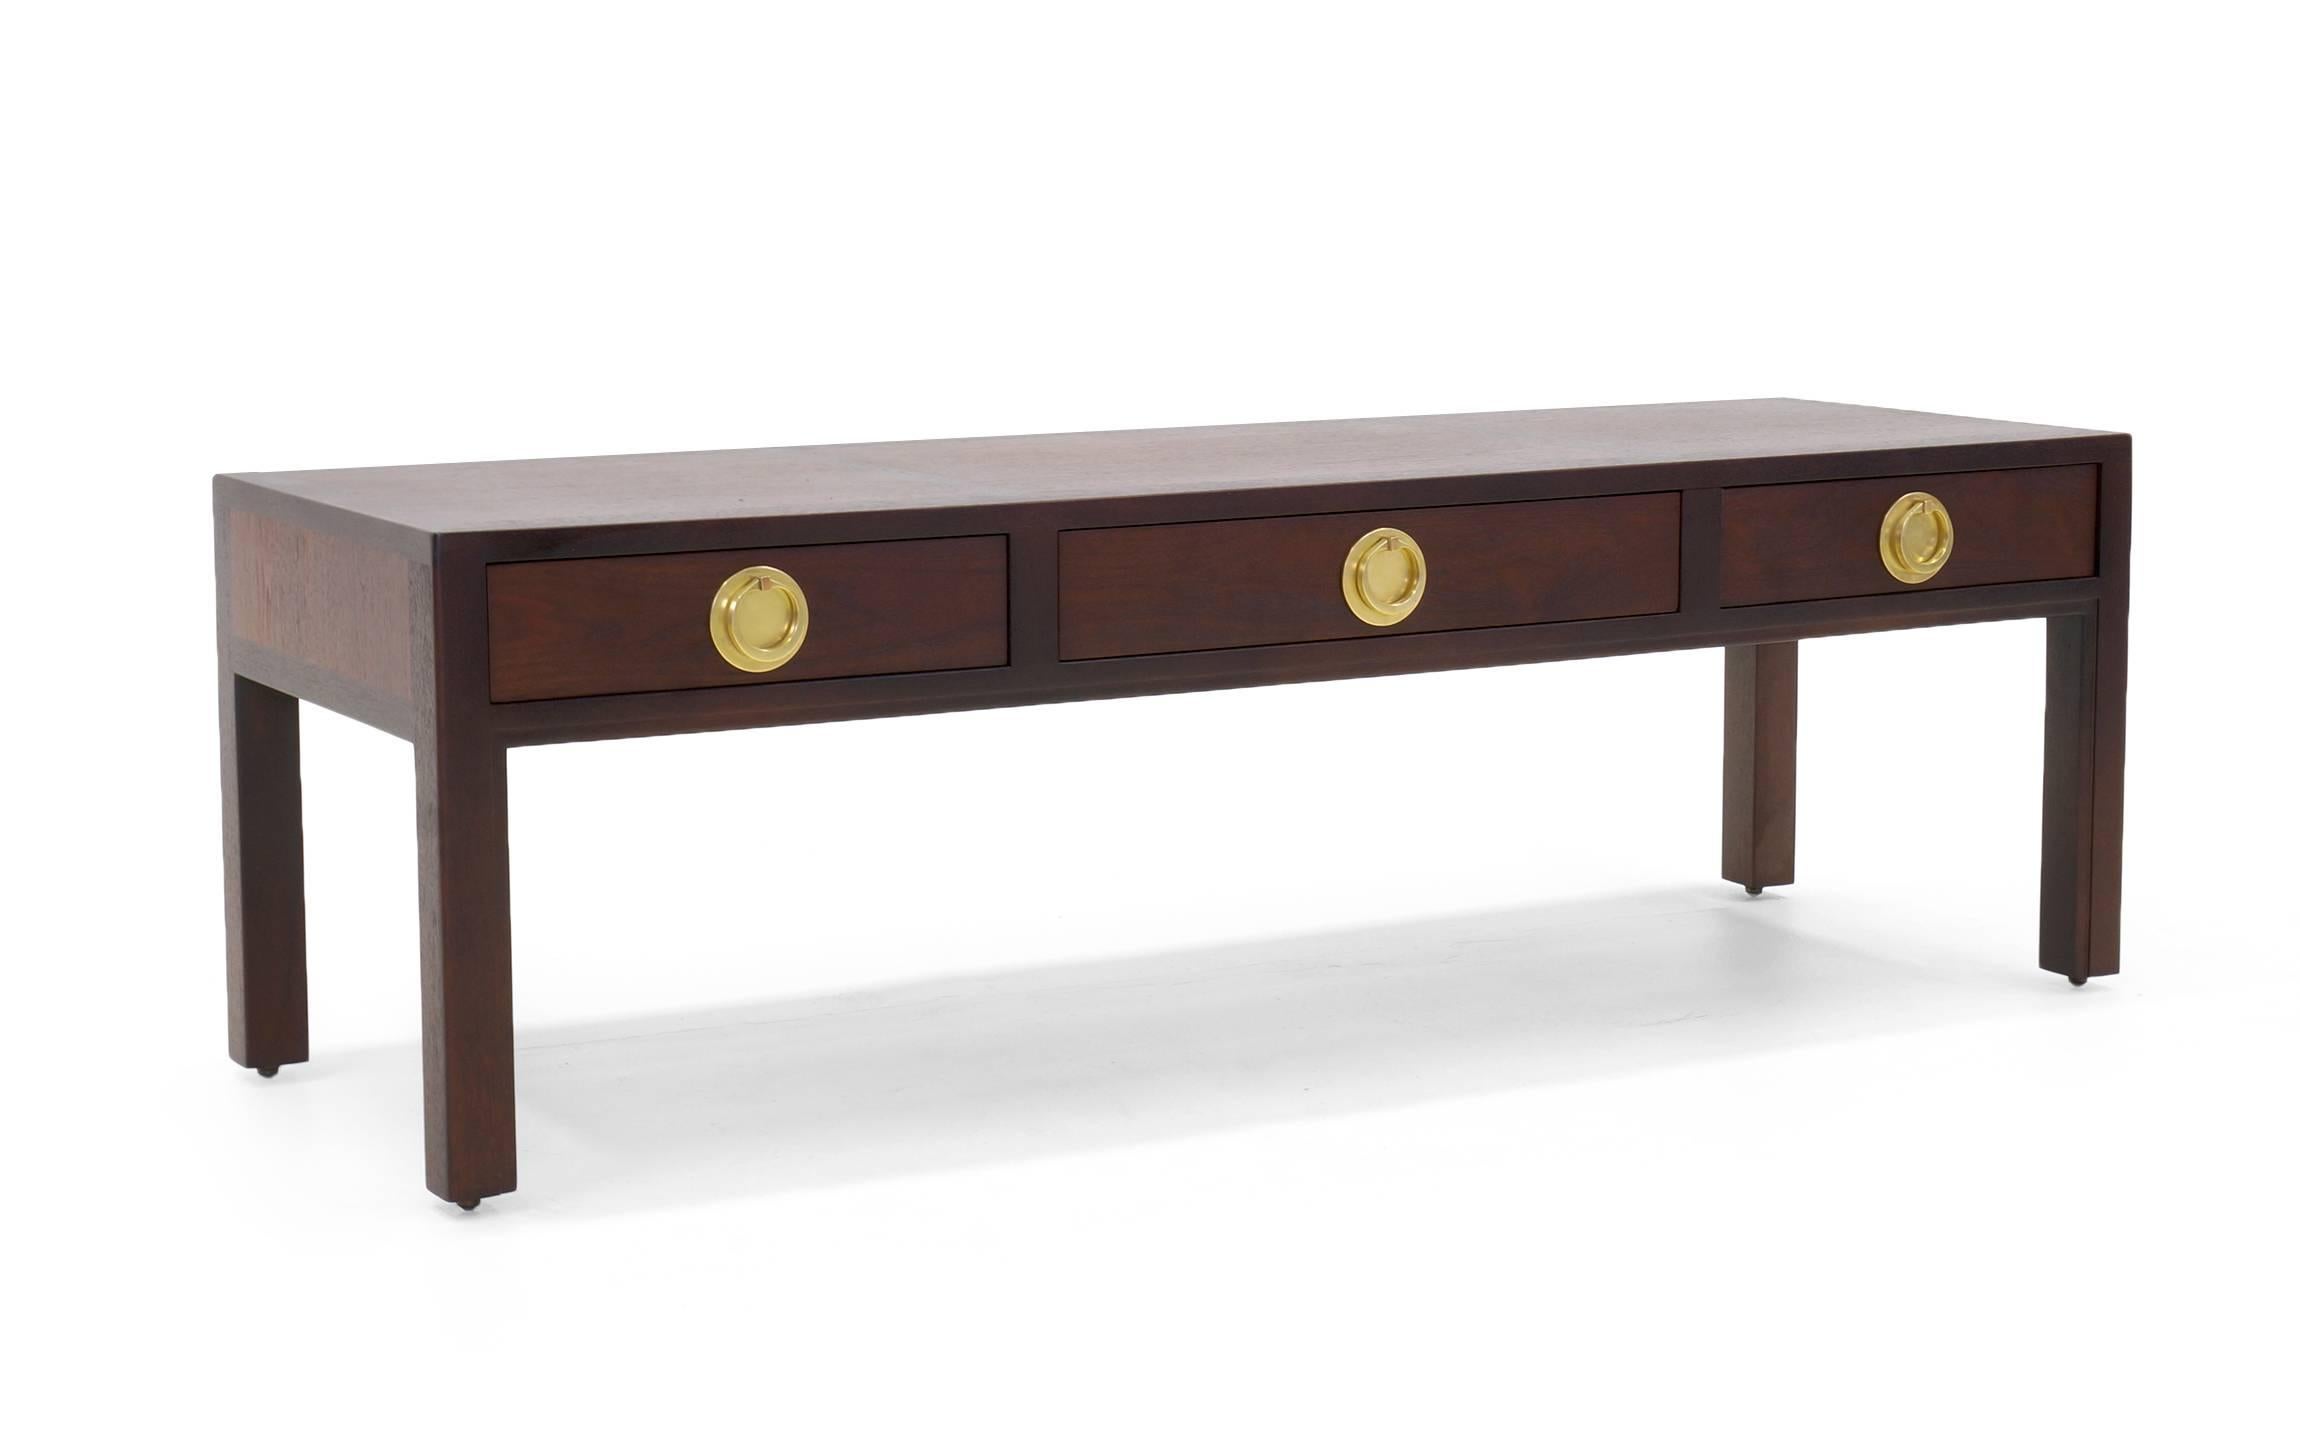 Elegant two-toned Edward Wormley coffee table with three drawers and solid brass pulls. Excellent condition.